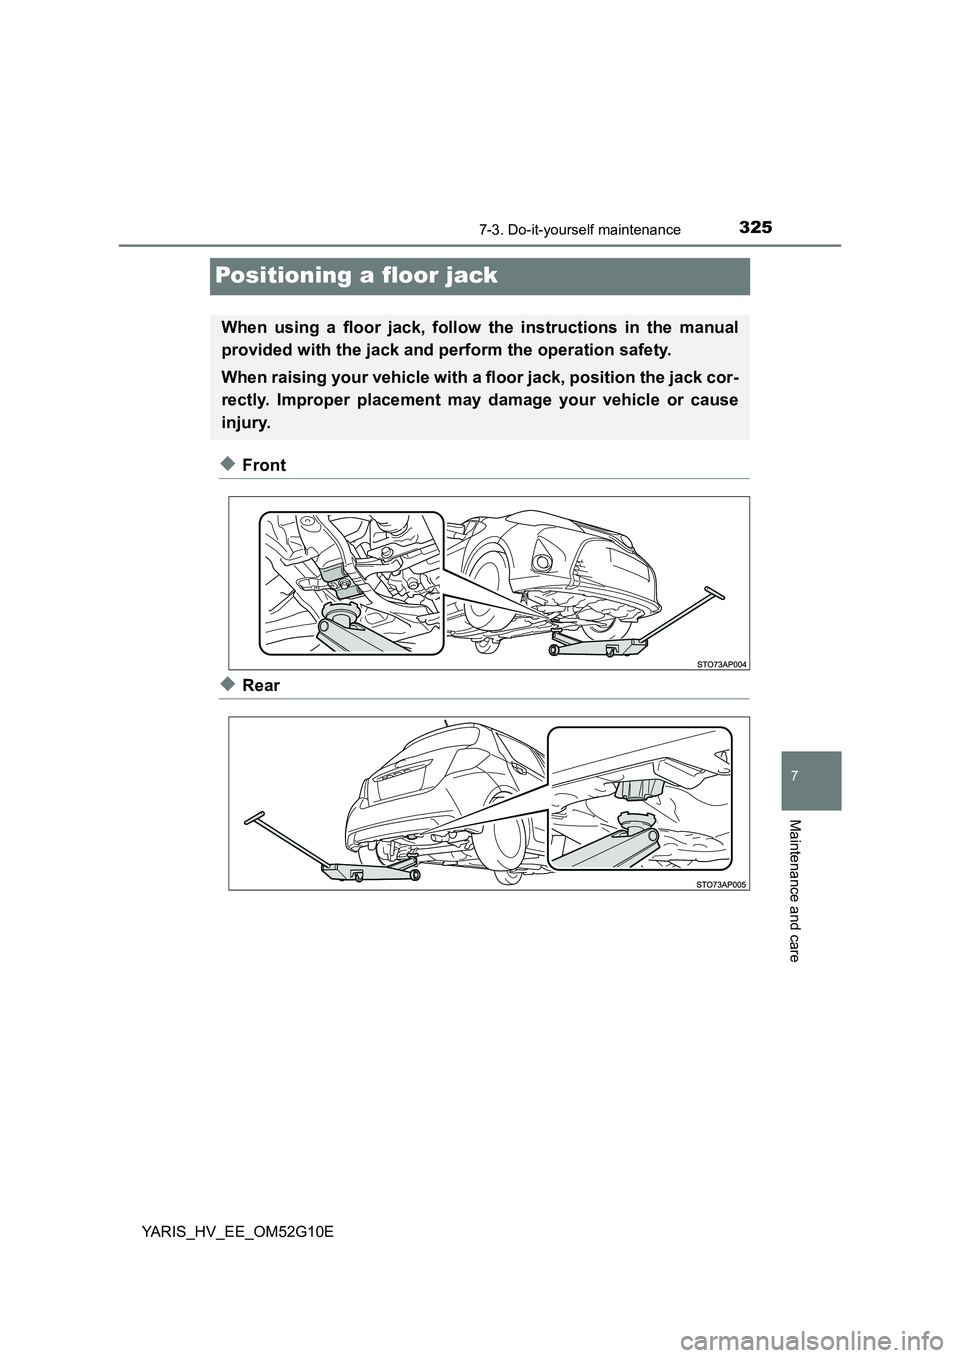 TOYOTA YARIS HYBRID 2016 Owners Manual 3257-3. Do-it-yourself maintenance
7
Maintenance and care
YARIS_HV_EE_OM52G10E
Positioning a floor jack
◆Front
◆Rear
When using a floor jack, follow the instructions in the manual 
provided with t